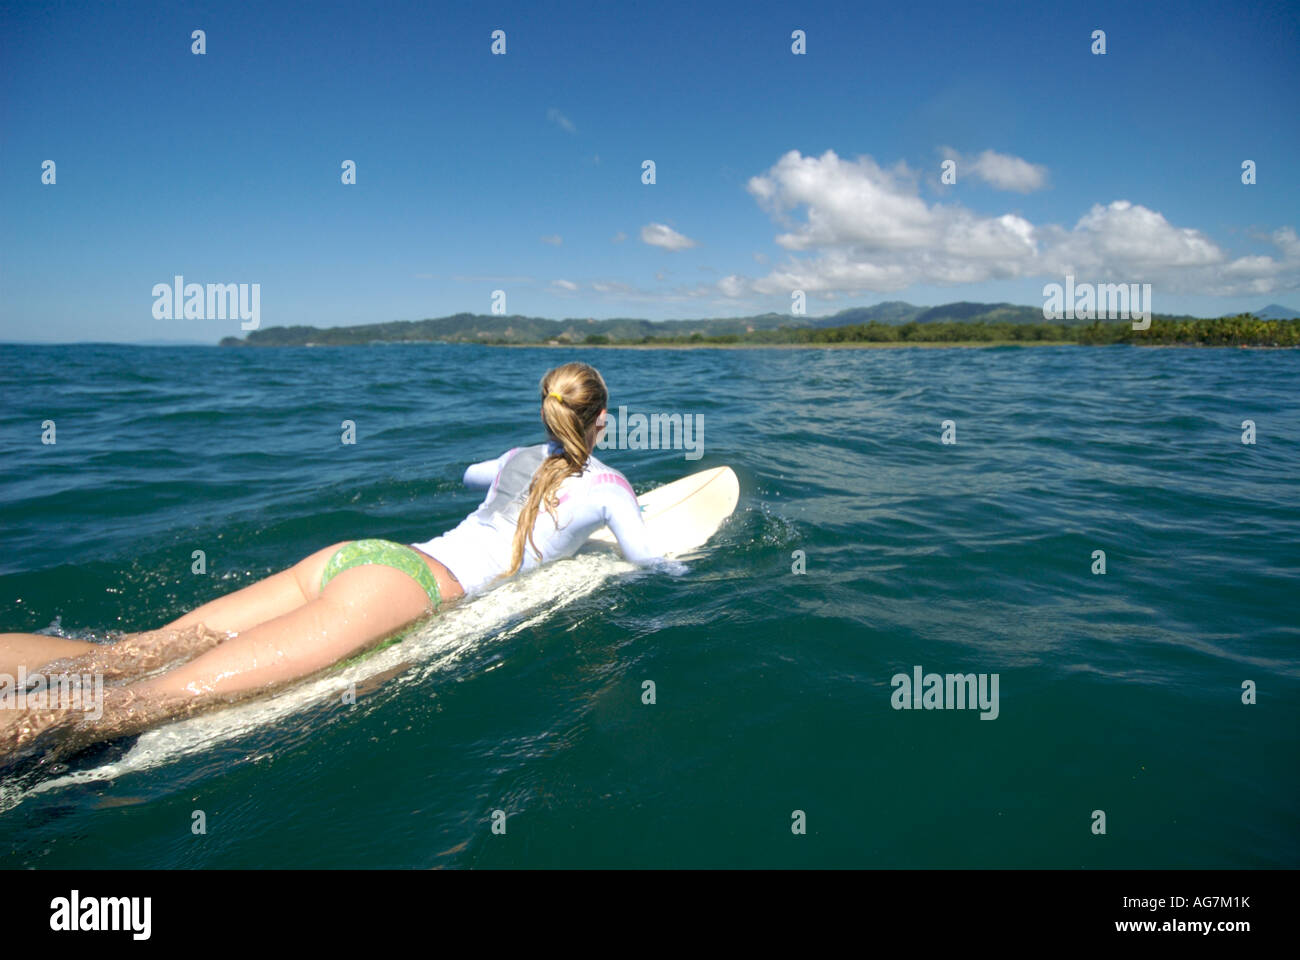 Blonde woman lying on a surfboard Stock Photo